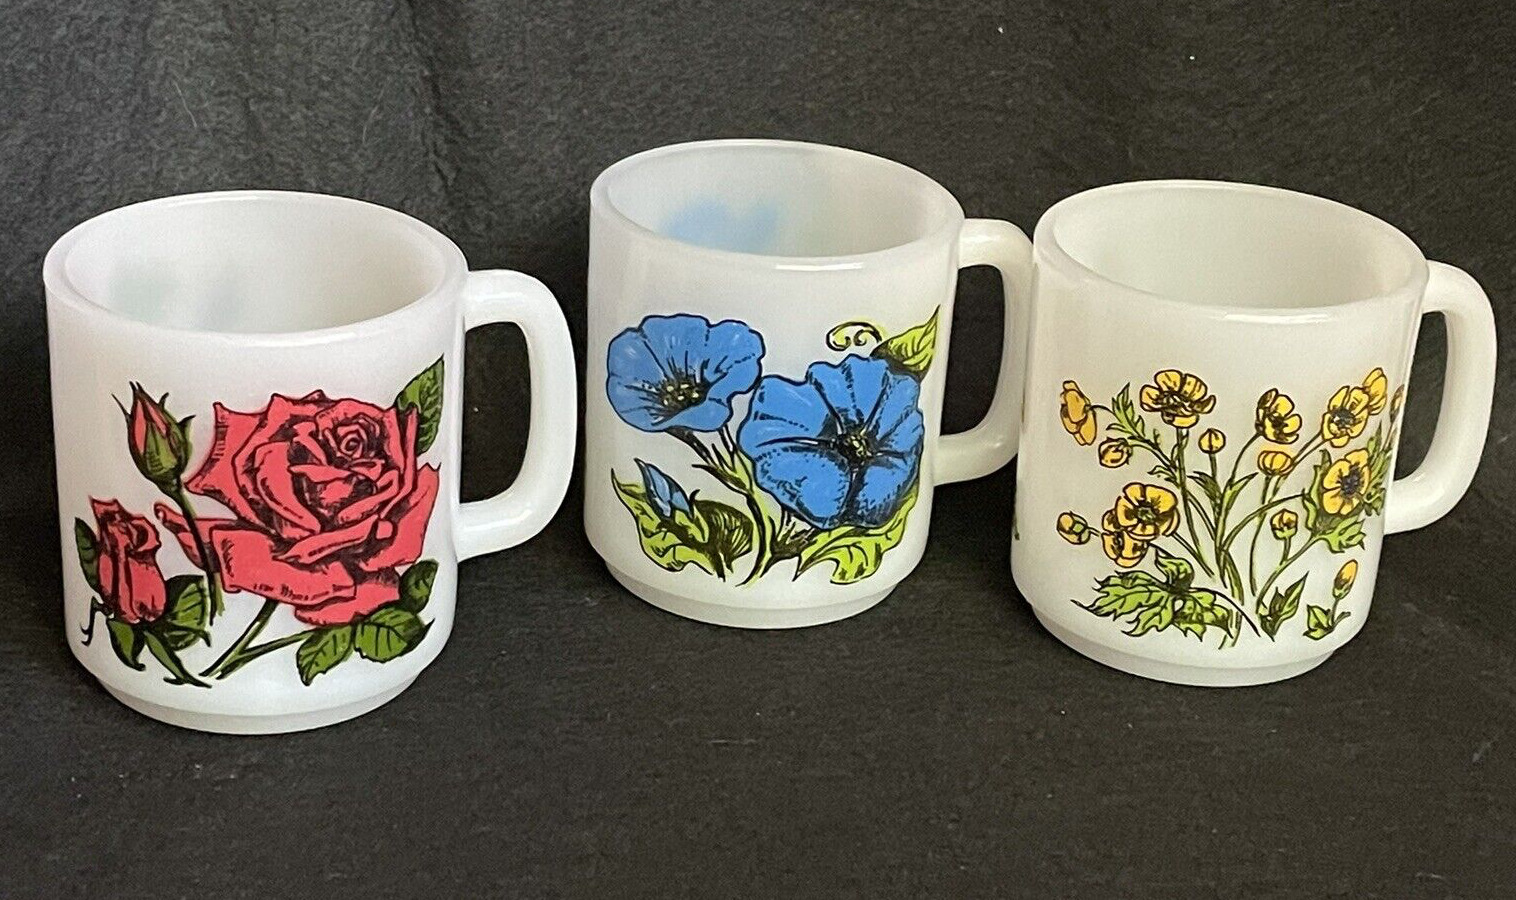 3 Vintage Glasbake Milk Glass Mug Cup Stacking In The Language Of Flowers